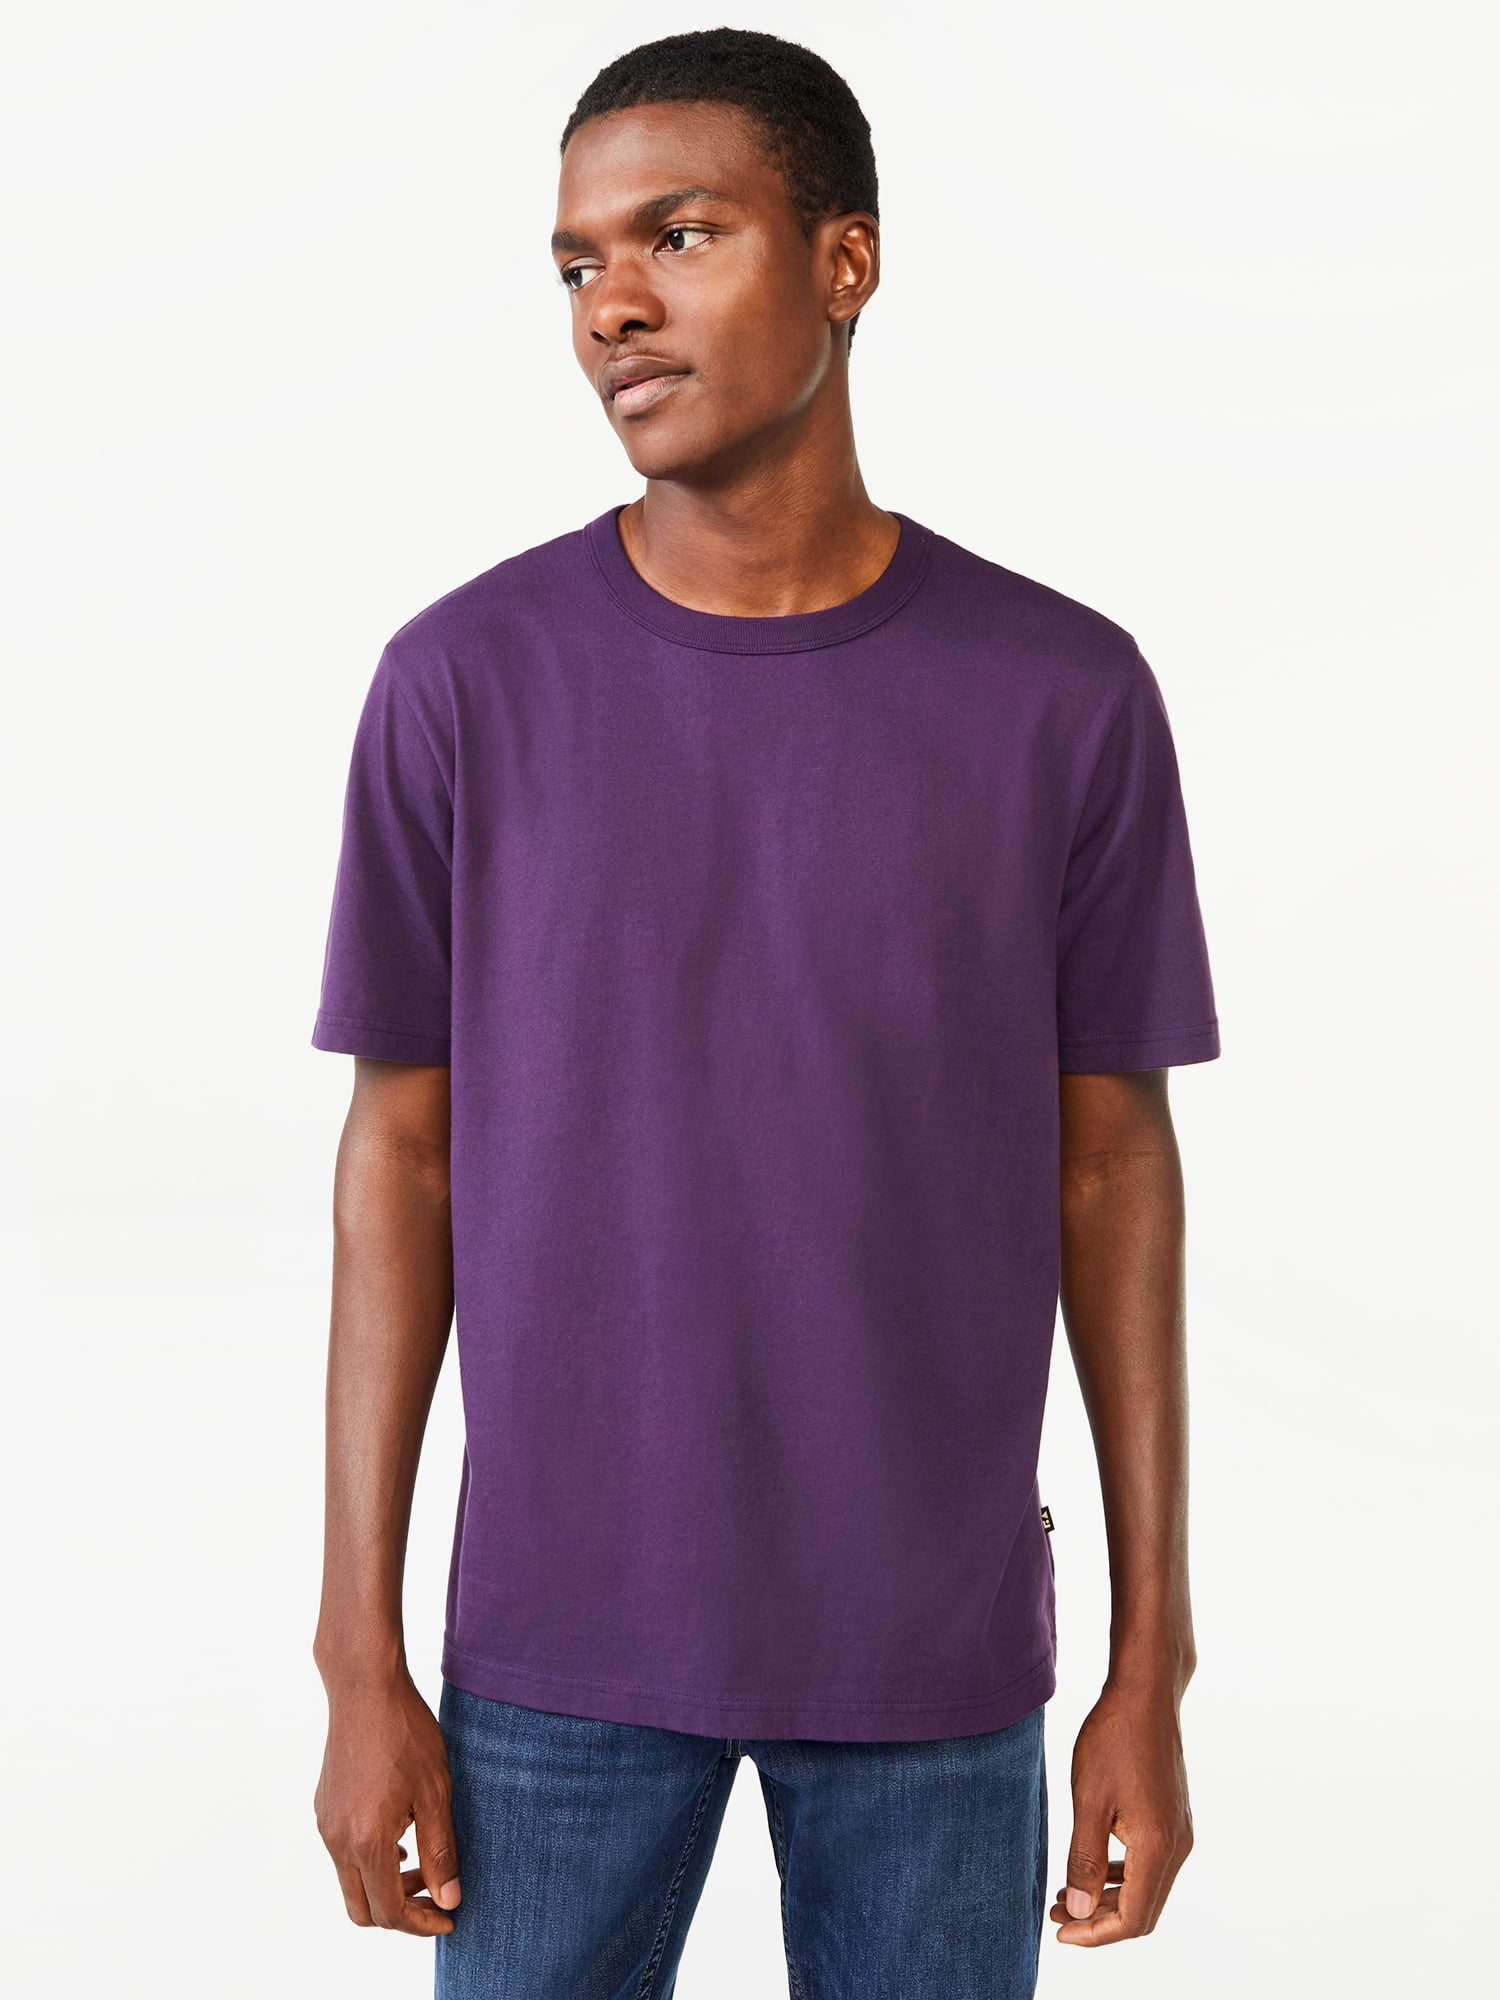 Free Assembly Men's Everyday Tee with Short Sleeves, Sizes XS-3XL ...